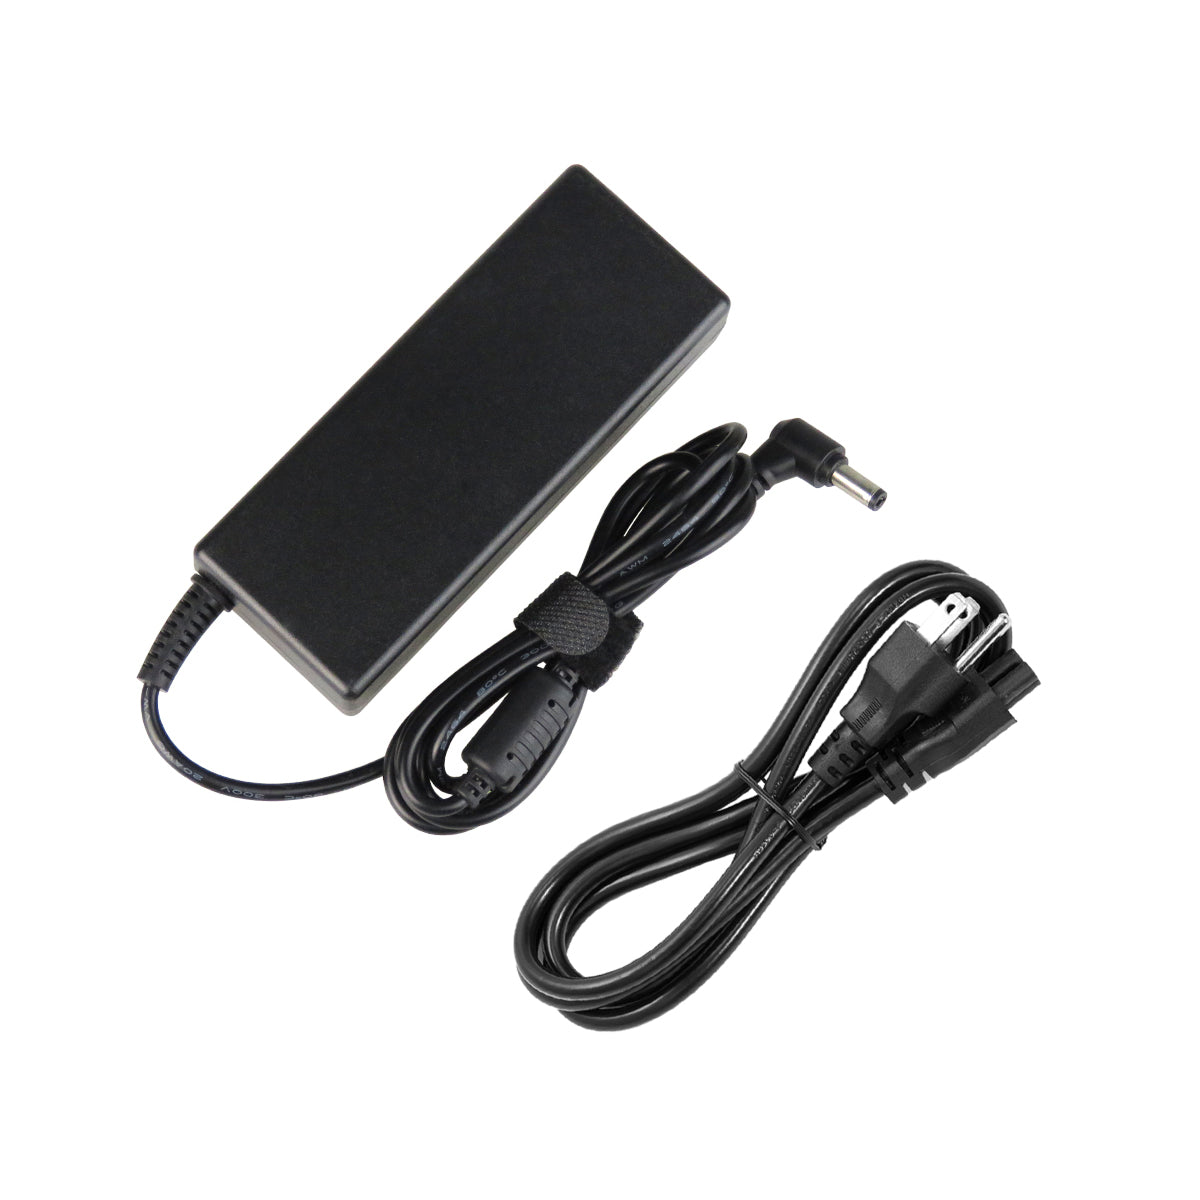 AC Adapter Charger for ASUS A55VJ Notebook.